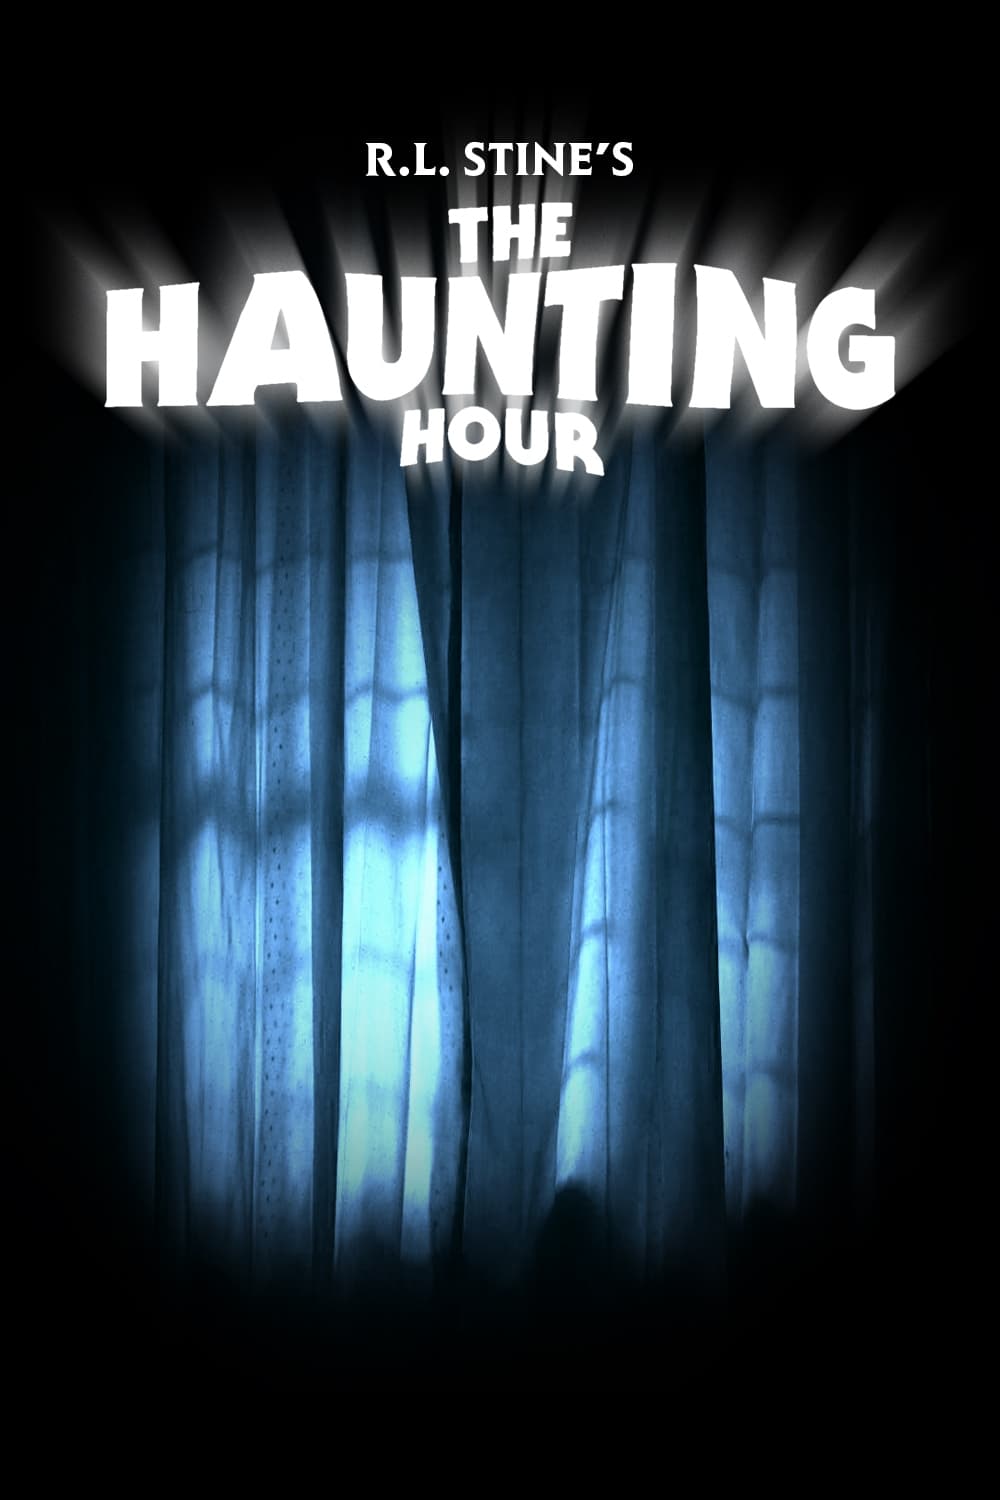 R. L. Stine's The Haunting Hour (2010)